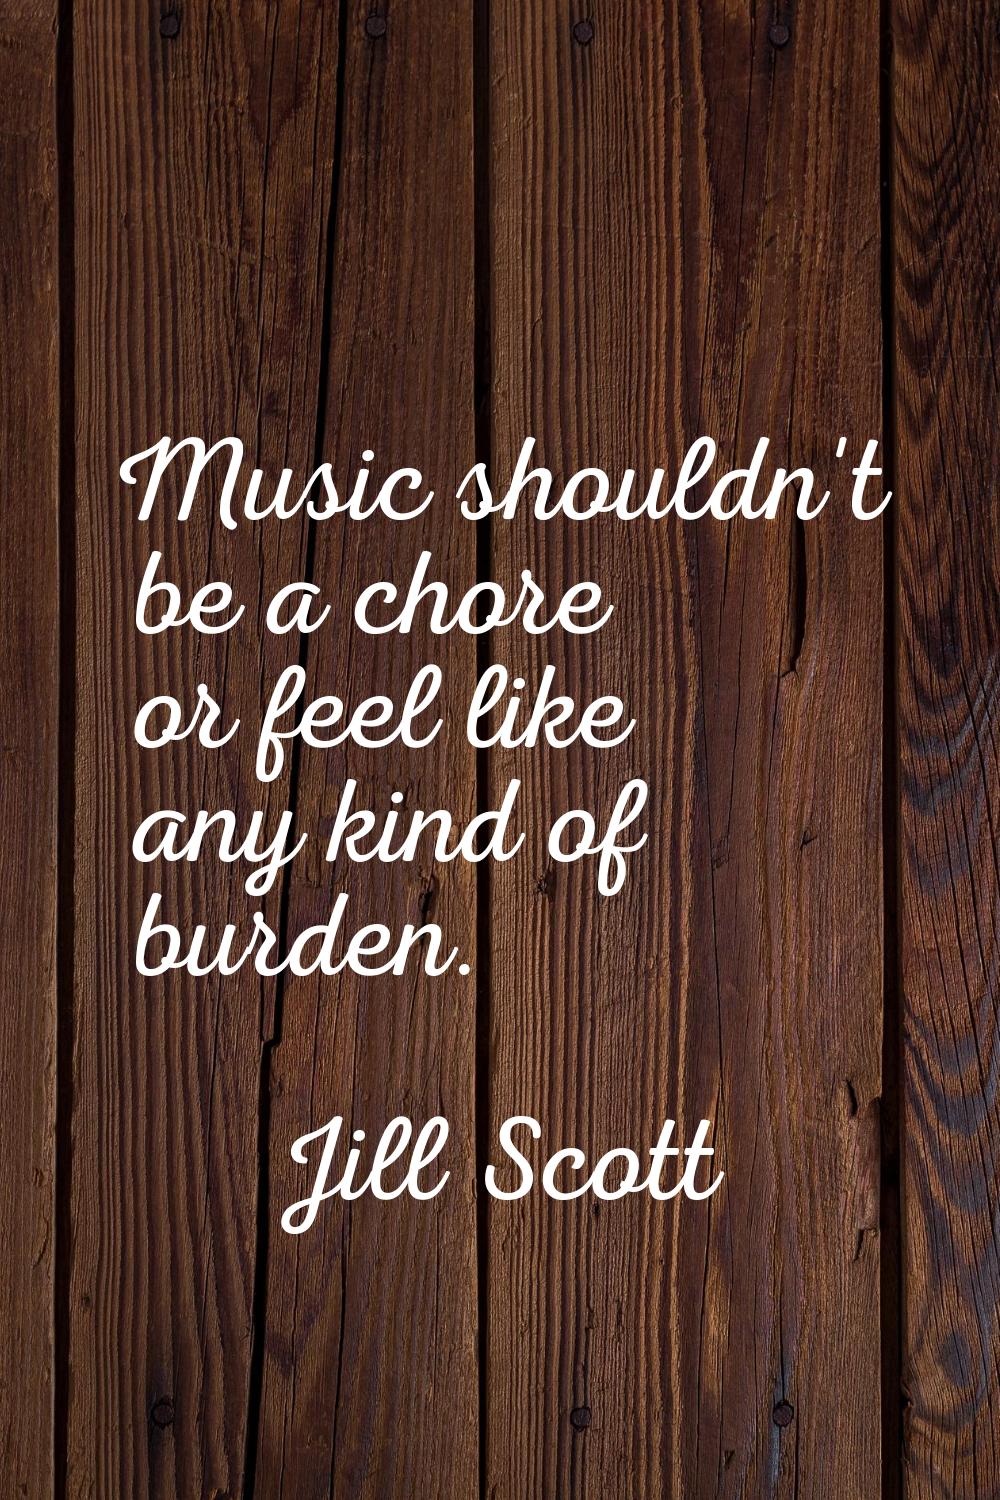 Music shouldn't be a chore or feel like any kind of burden.